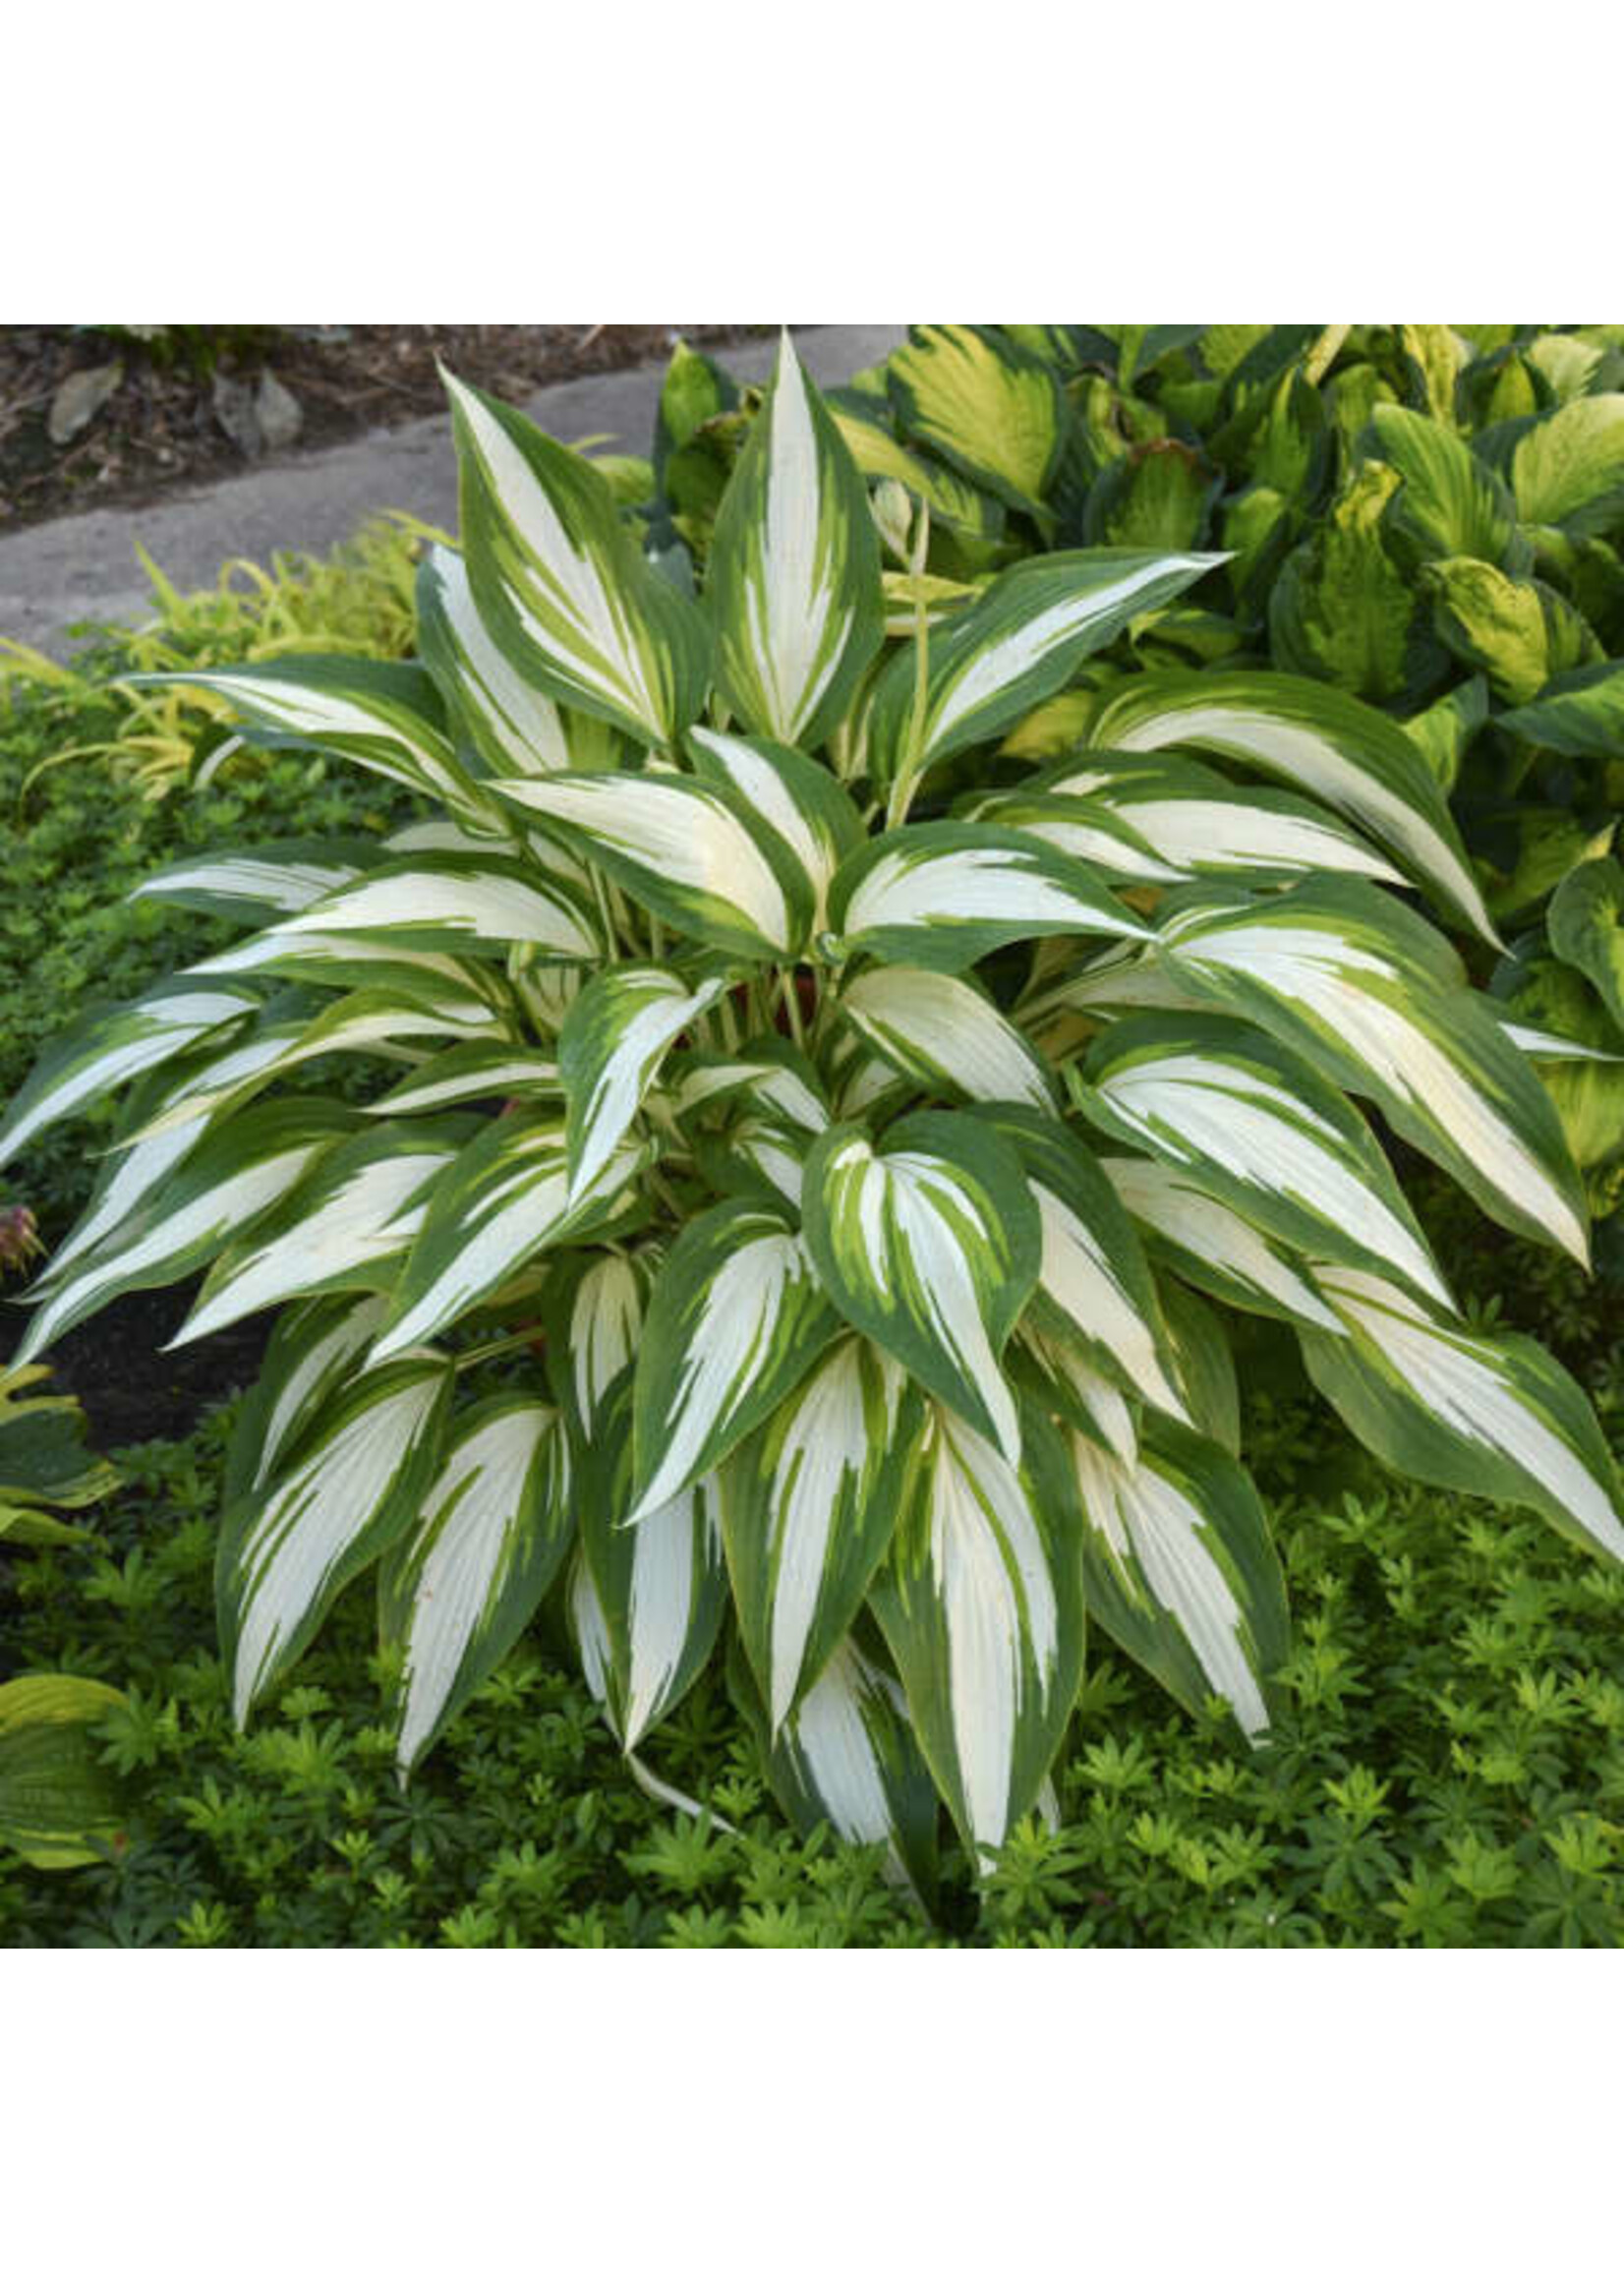 Hosta Cool as a Cucumber, Plantain Lily, #1